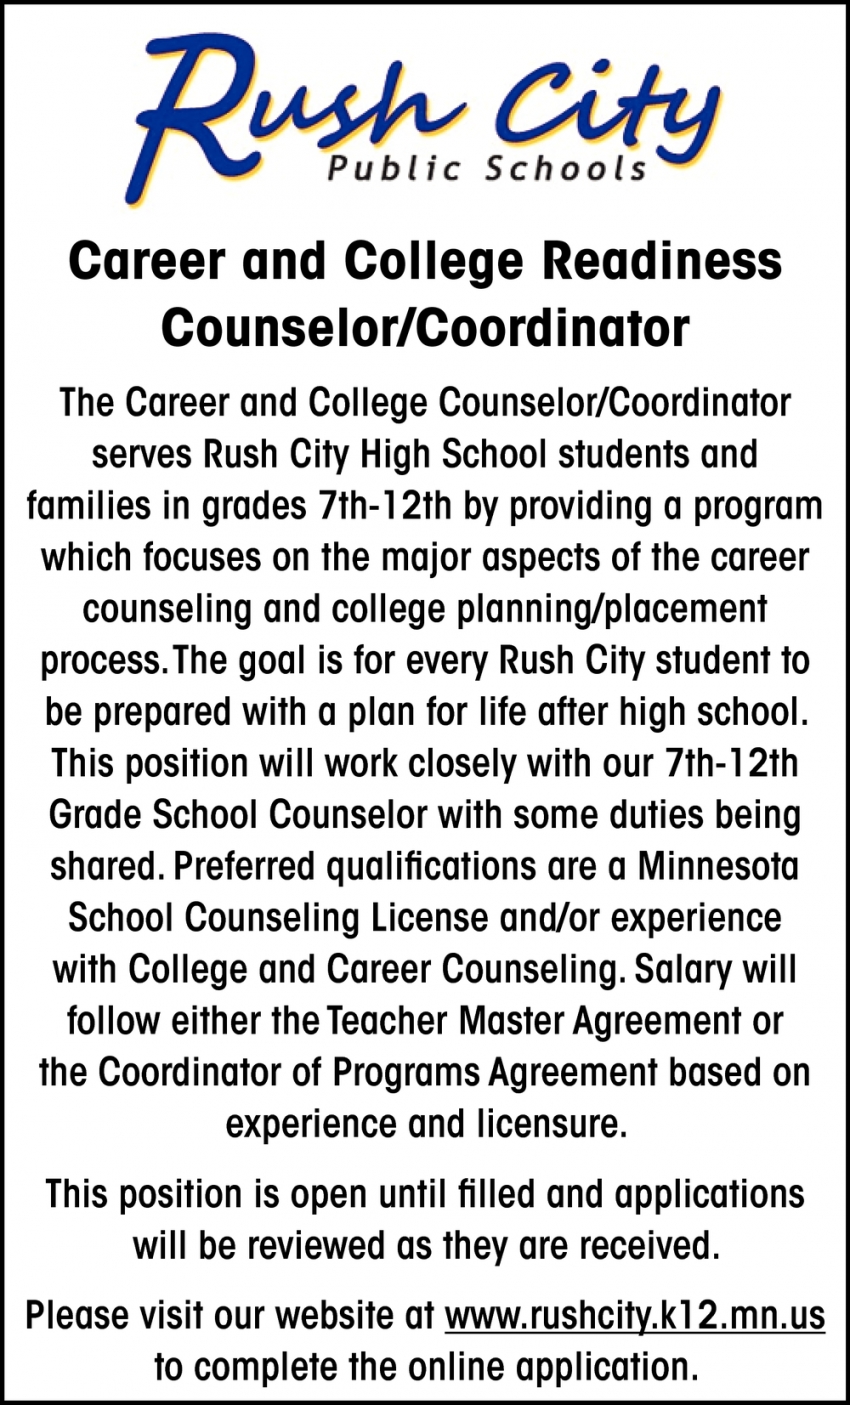 Career and College Readiness Counselor/Coordinator